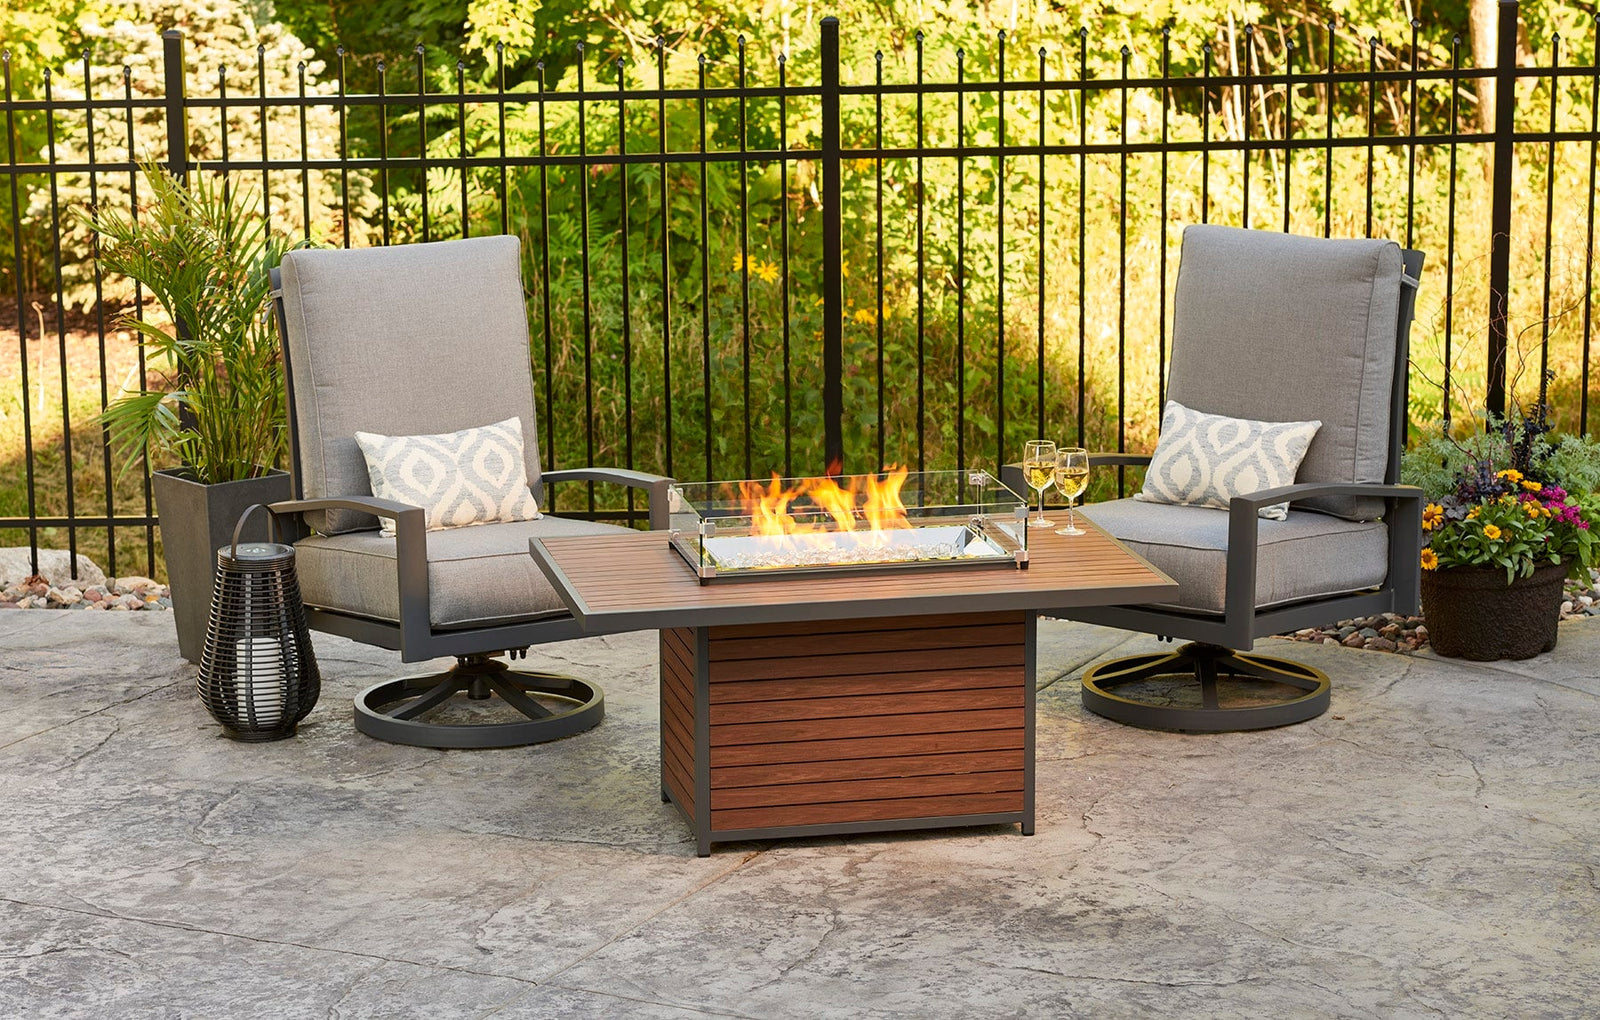 Weatherproof Furniture for your Backyard or Patio